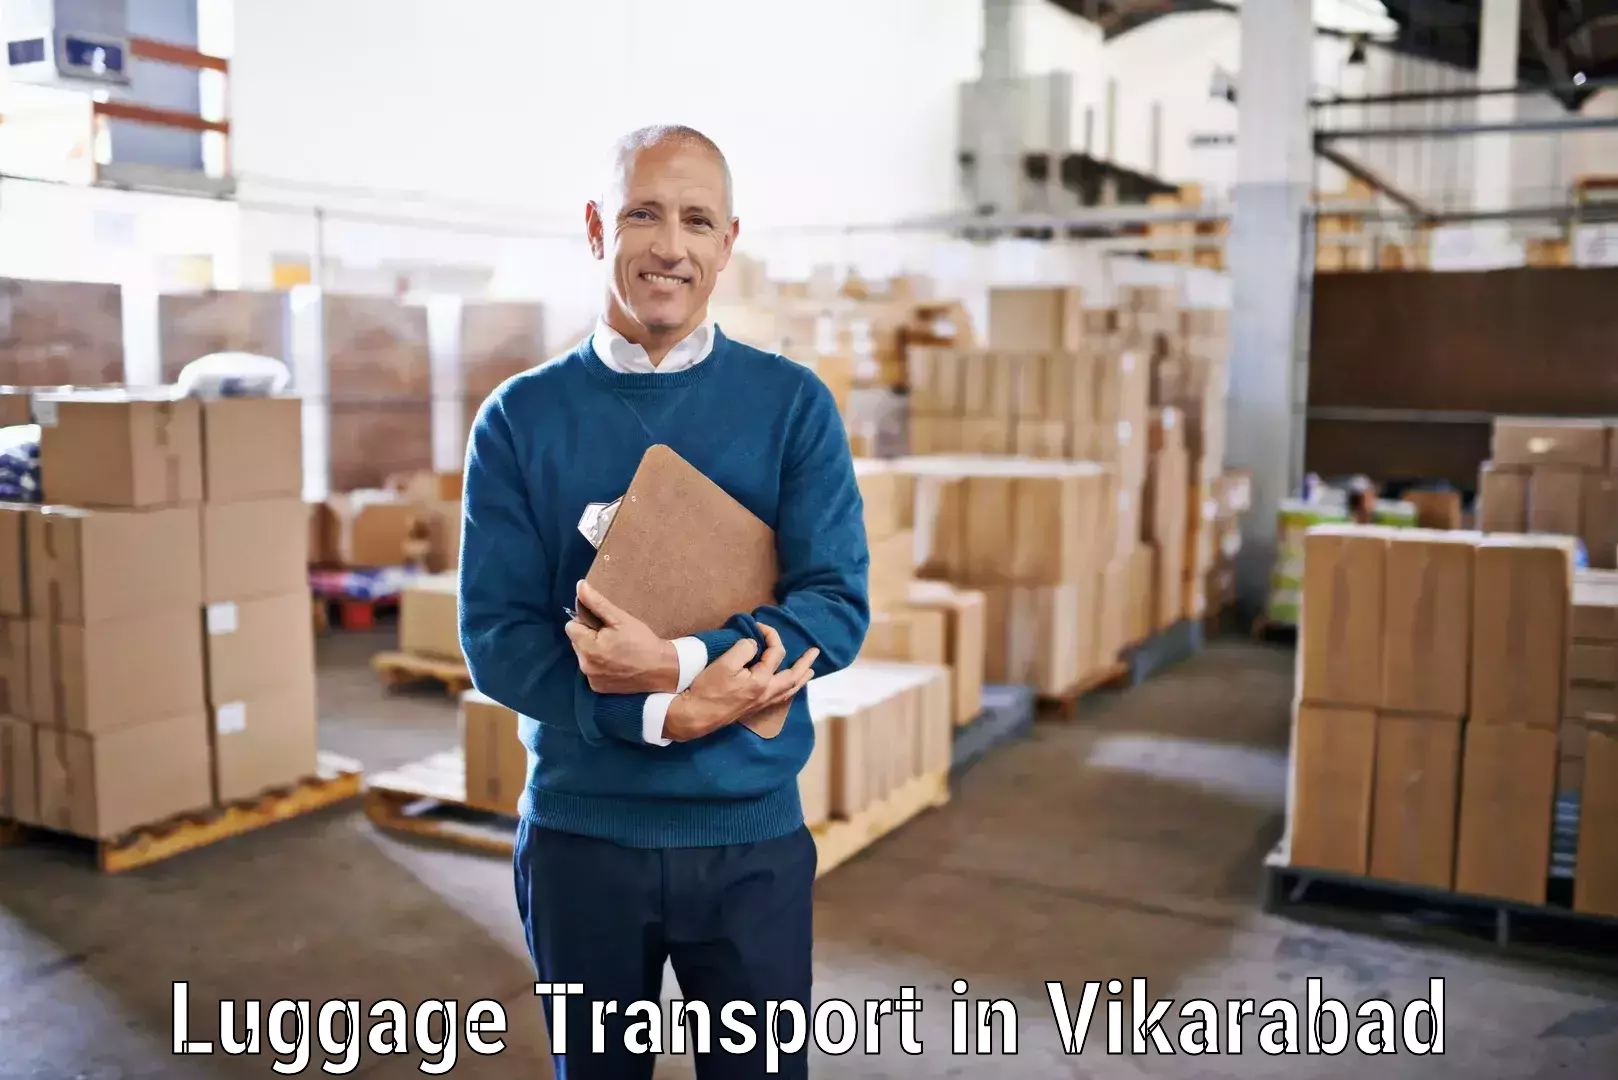 Luggage shipping trends in Vikarabad